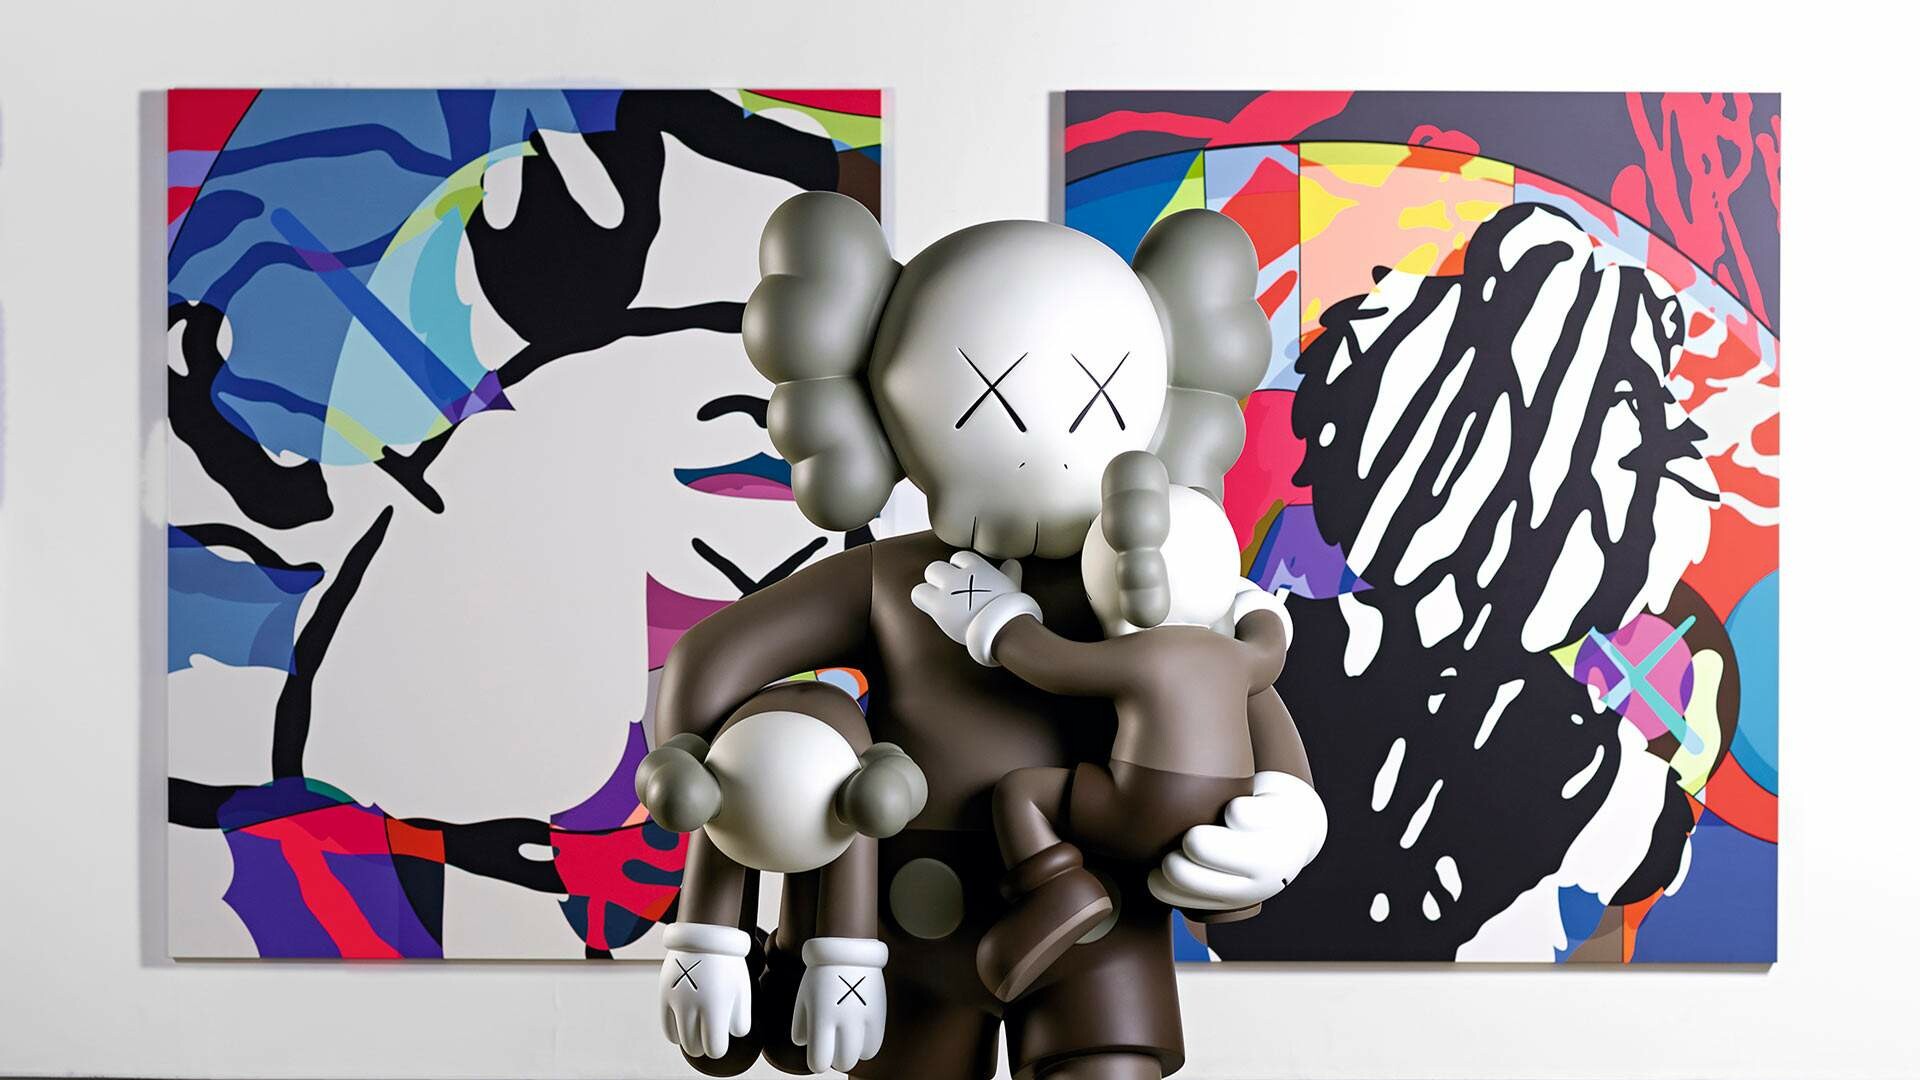 KAWS: World-Renowned Artist, Bringing Large-Scale Pop-Culture Sculptures to the NGV. 1920x1080 Full HD Wallpaper.